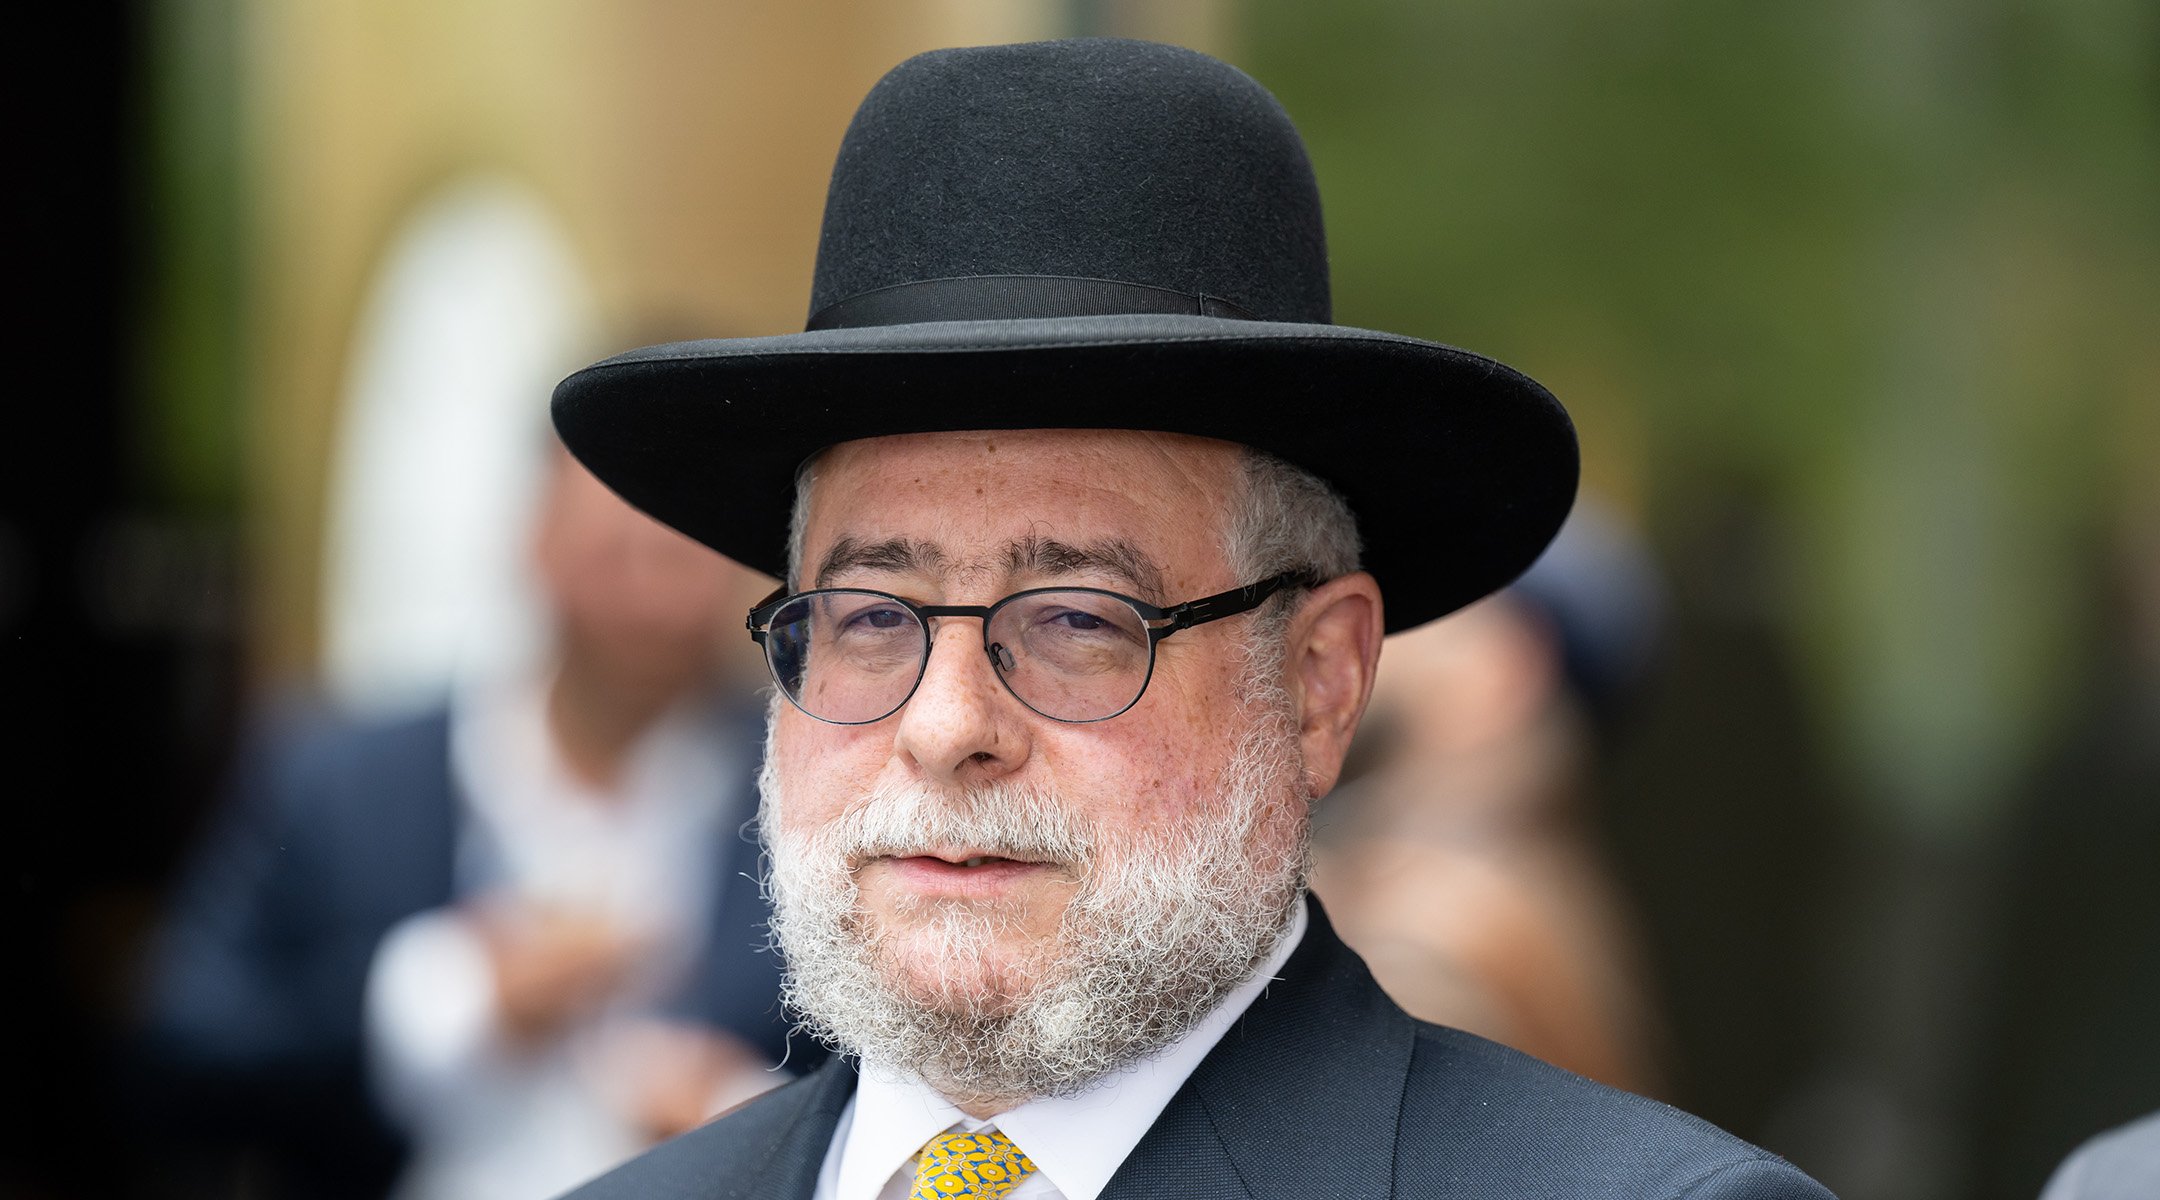 Pinchas Goldschmidt, Former Chief Rabbi of Moscow, attends the 32nd General Assembly of the Conference of European Rabbis in Munich, Germany, May 30, 2022. (Sven Hoppe/picture alliance via Getty Images)